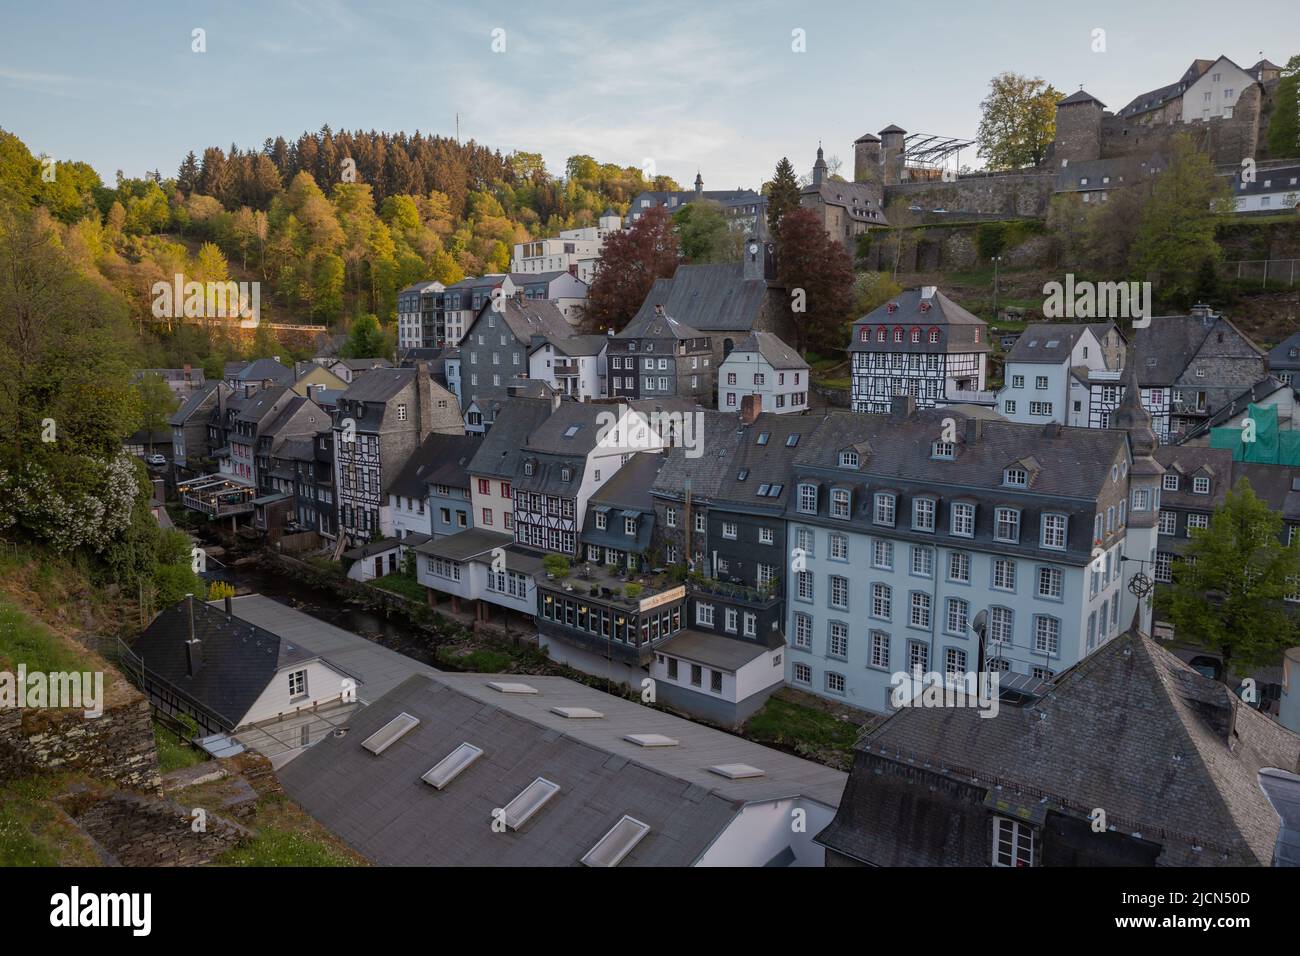 Cityscape of the old town of Monschau view from above Stock Photo